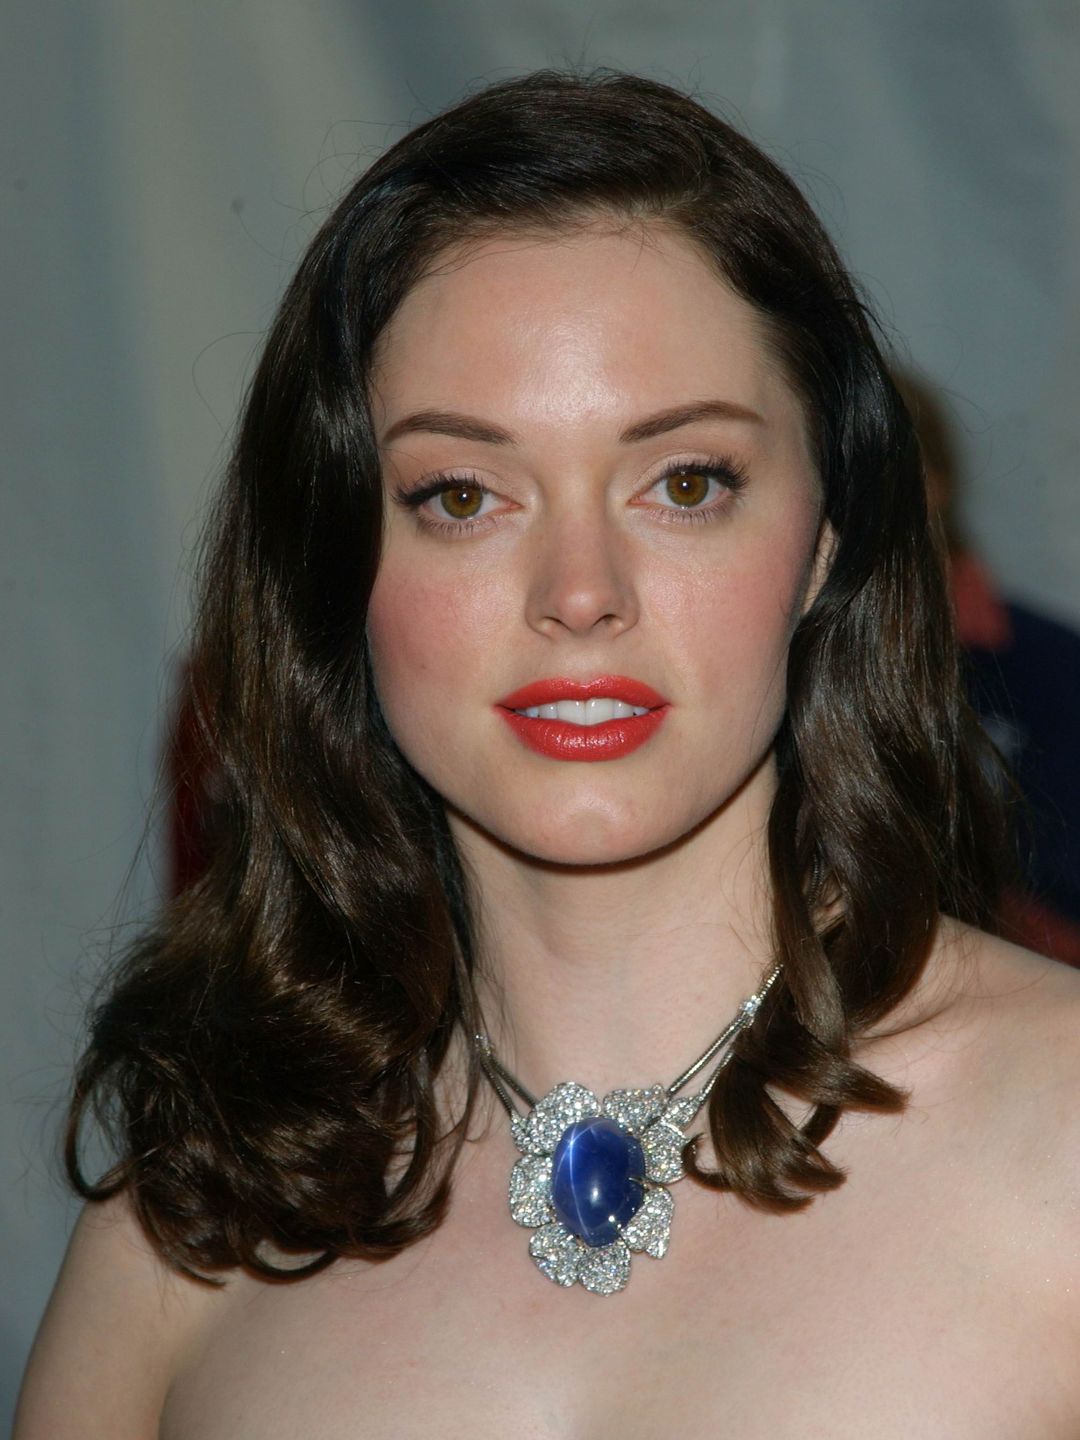 Rose McGowan does she have kids